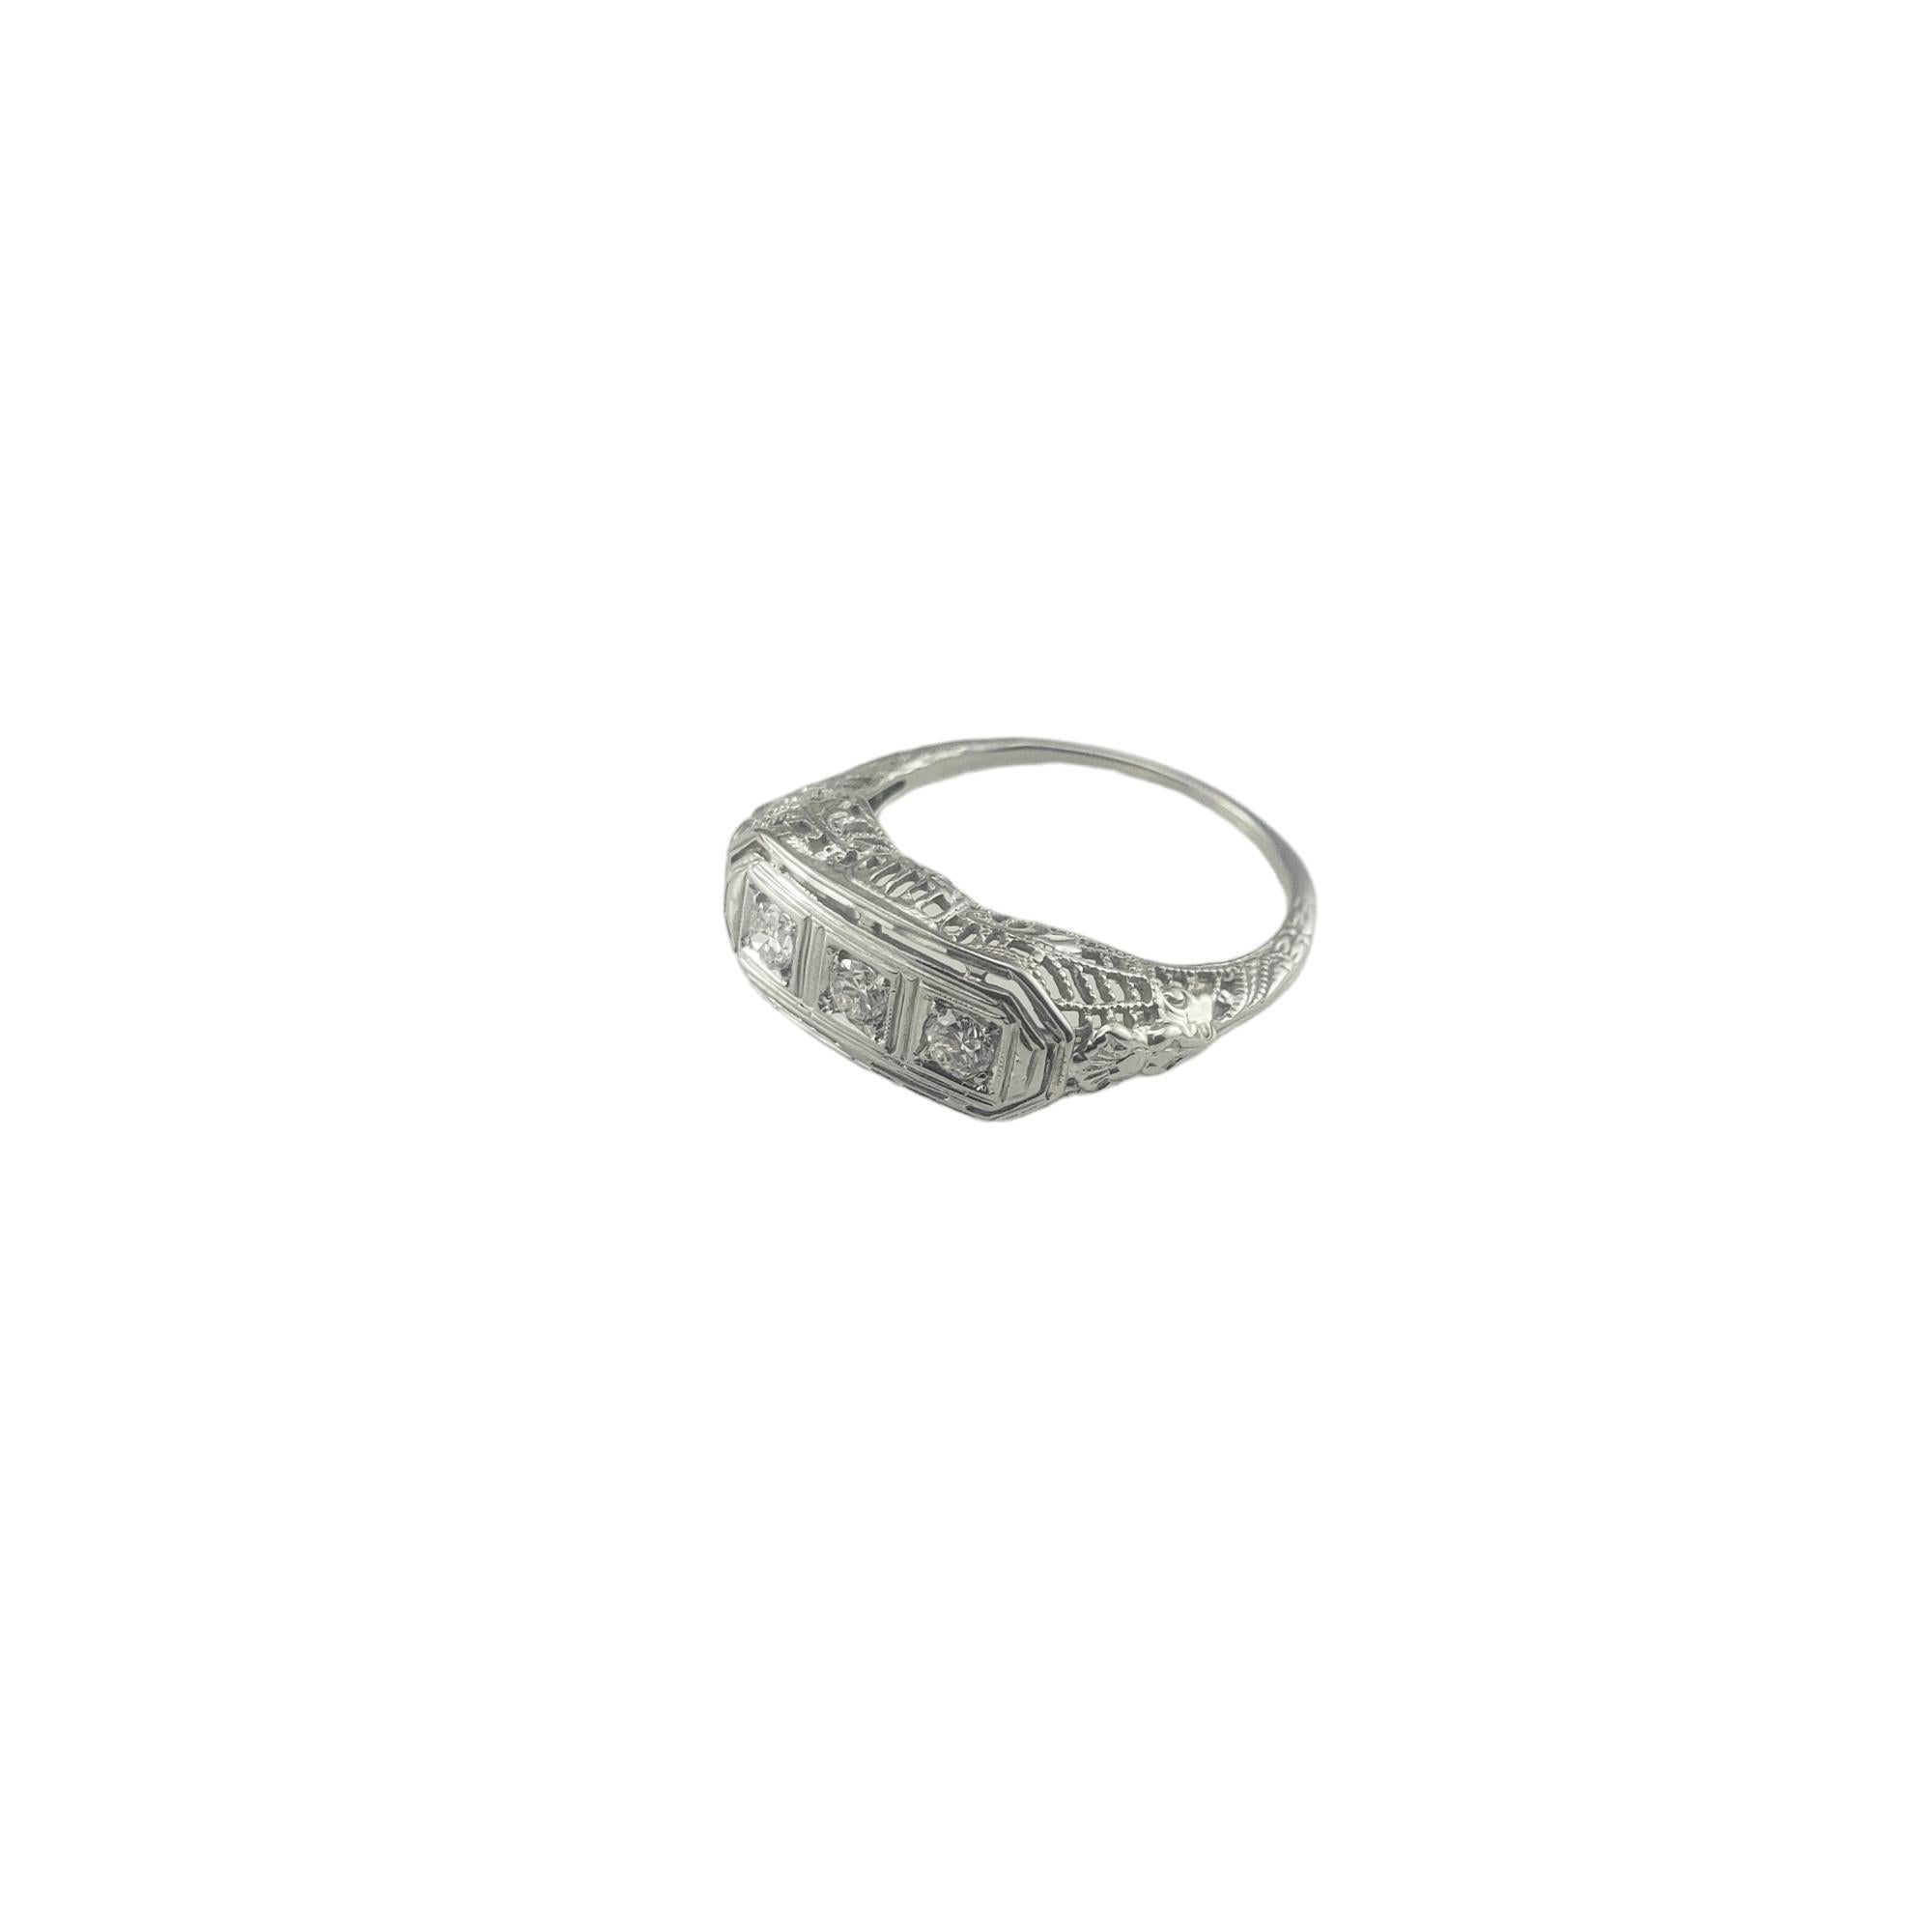 Round Cut 18 Karat White Gold Filigree and Diamond Ring Size 5.5-5.75 #16754 For Sale